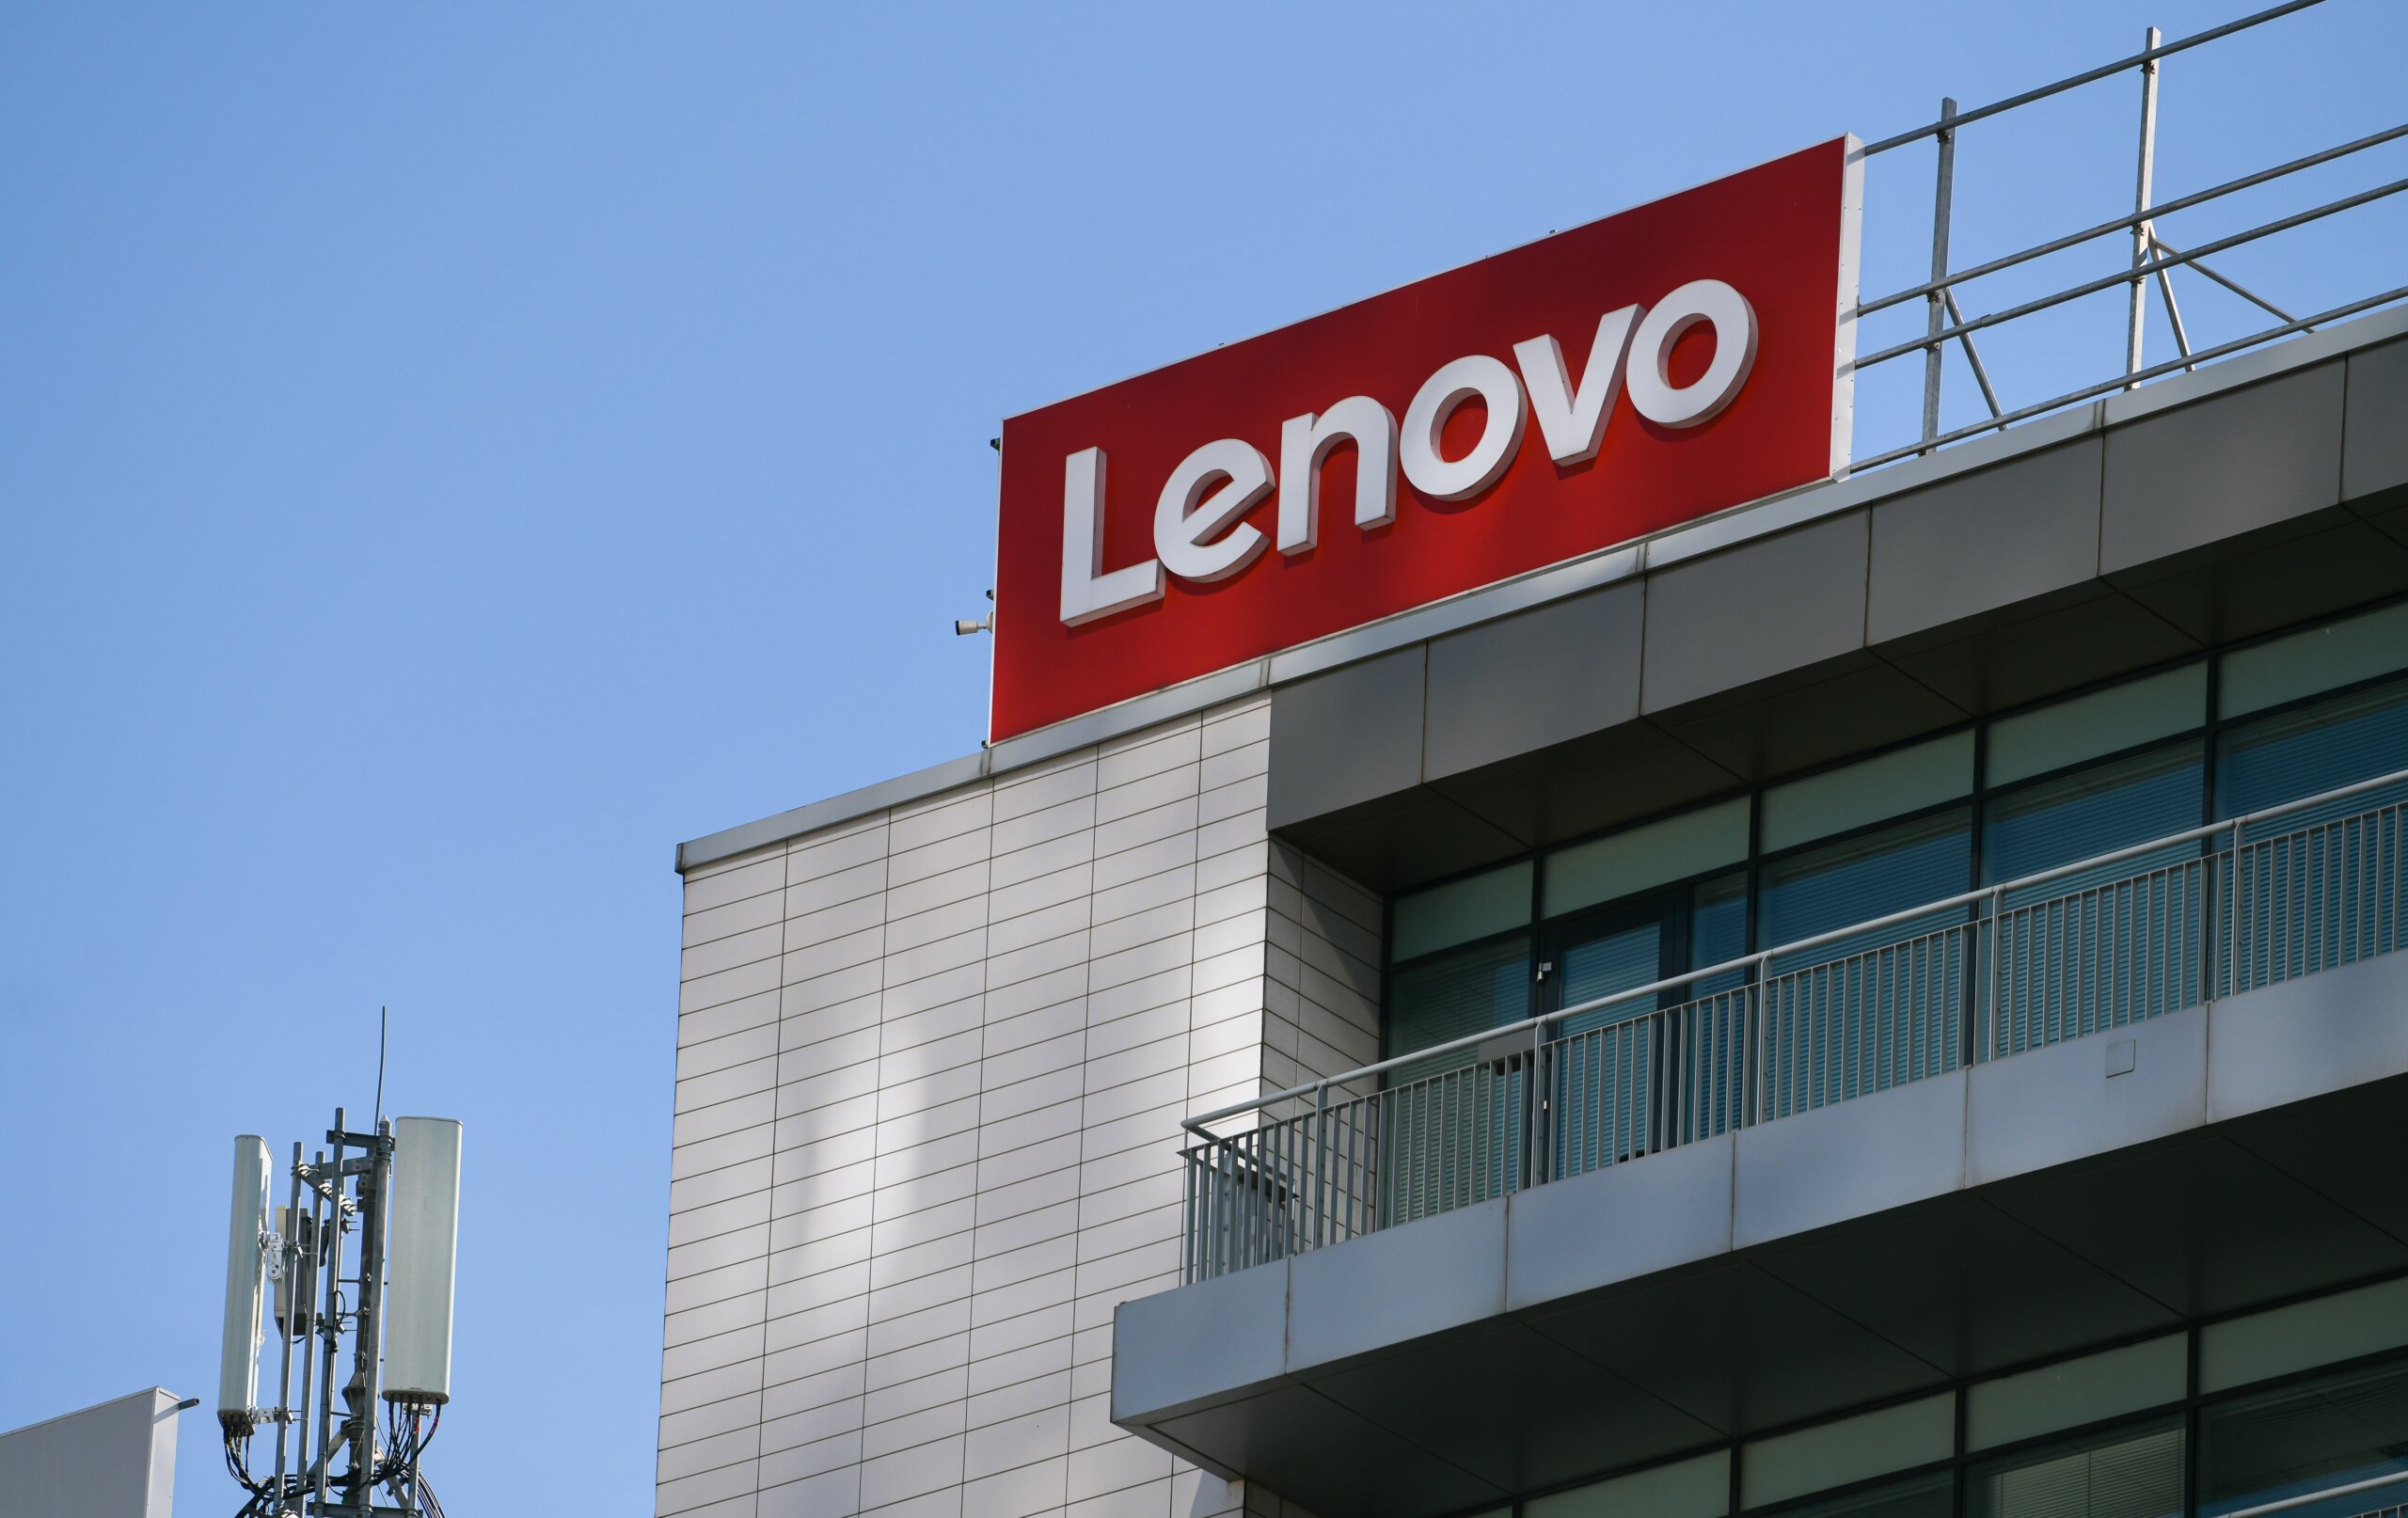 Lenovo saw its net income fall by a staggering 66%, indicating that the PC market is sliding more profoundly into a demand slump. Source: Shutterstock